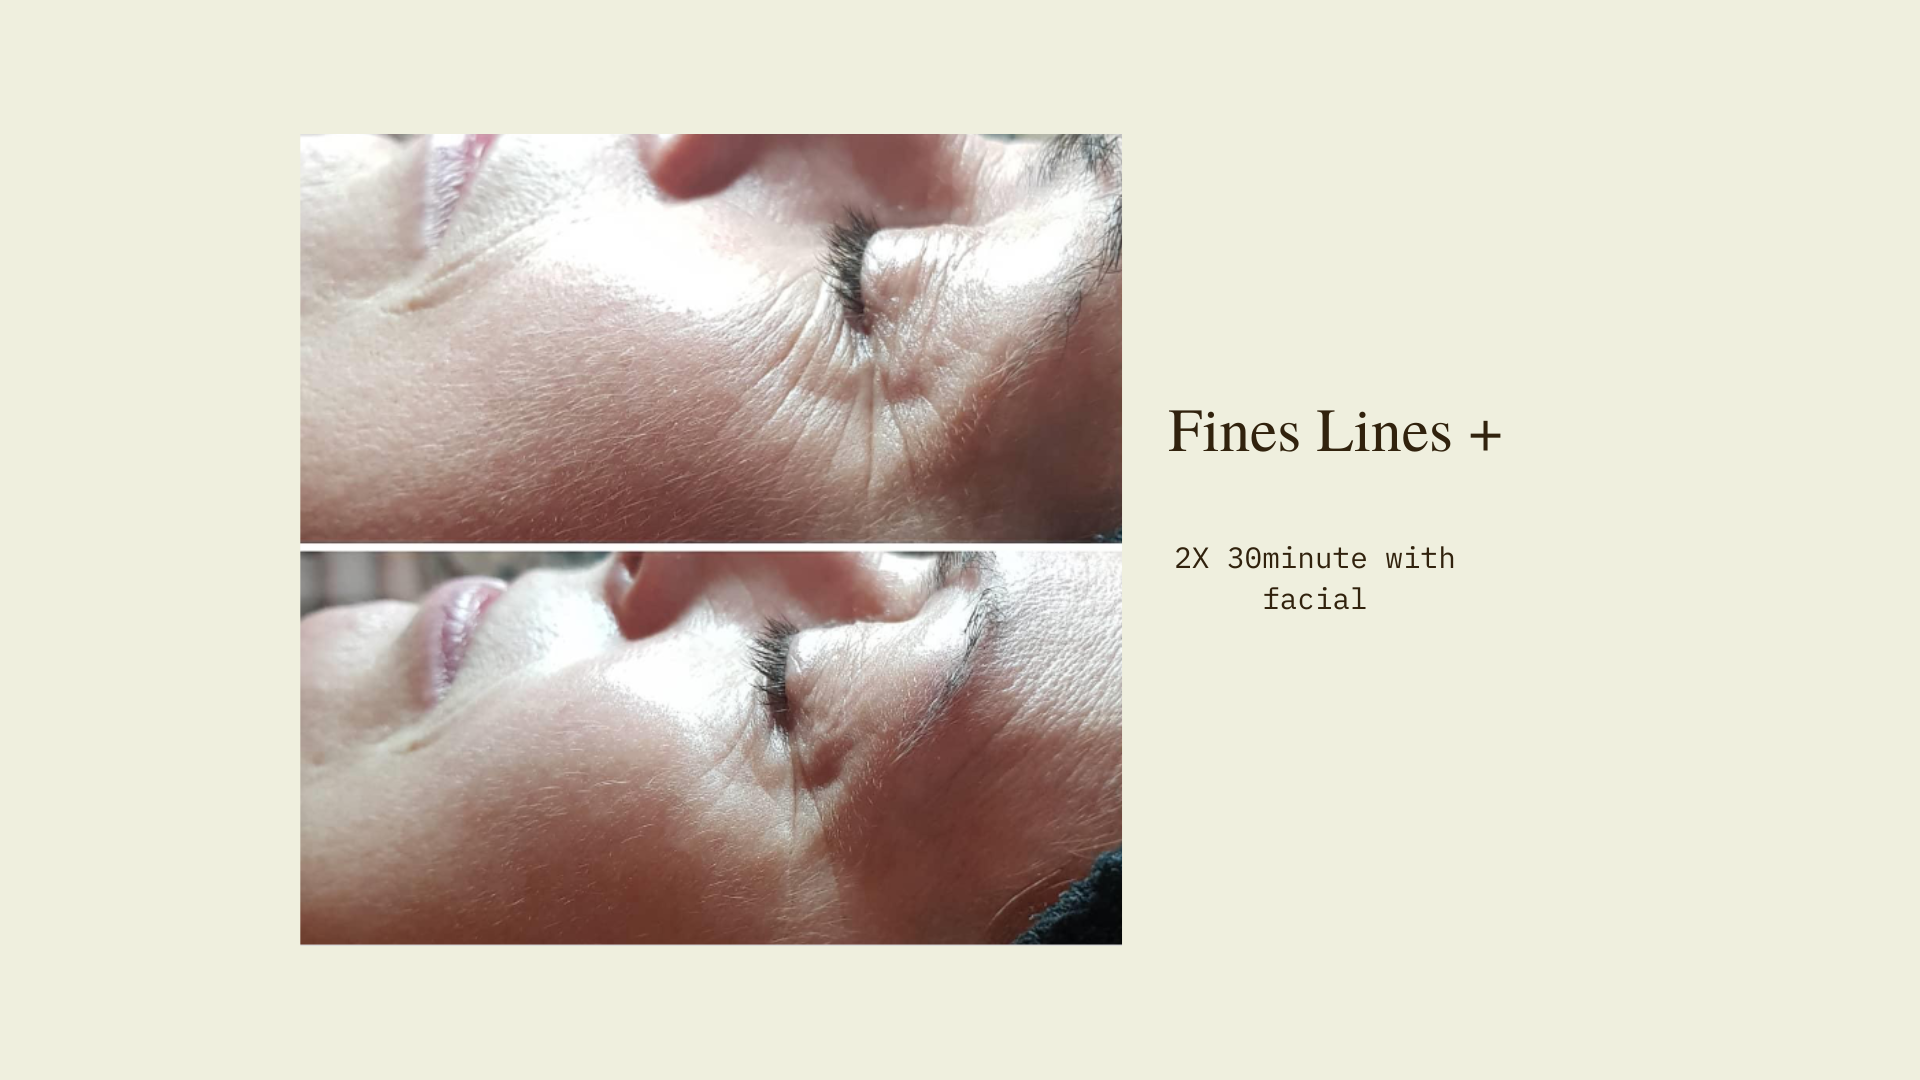 LED Facial Therapy Before and After results on Fine Lines